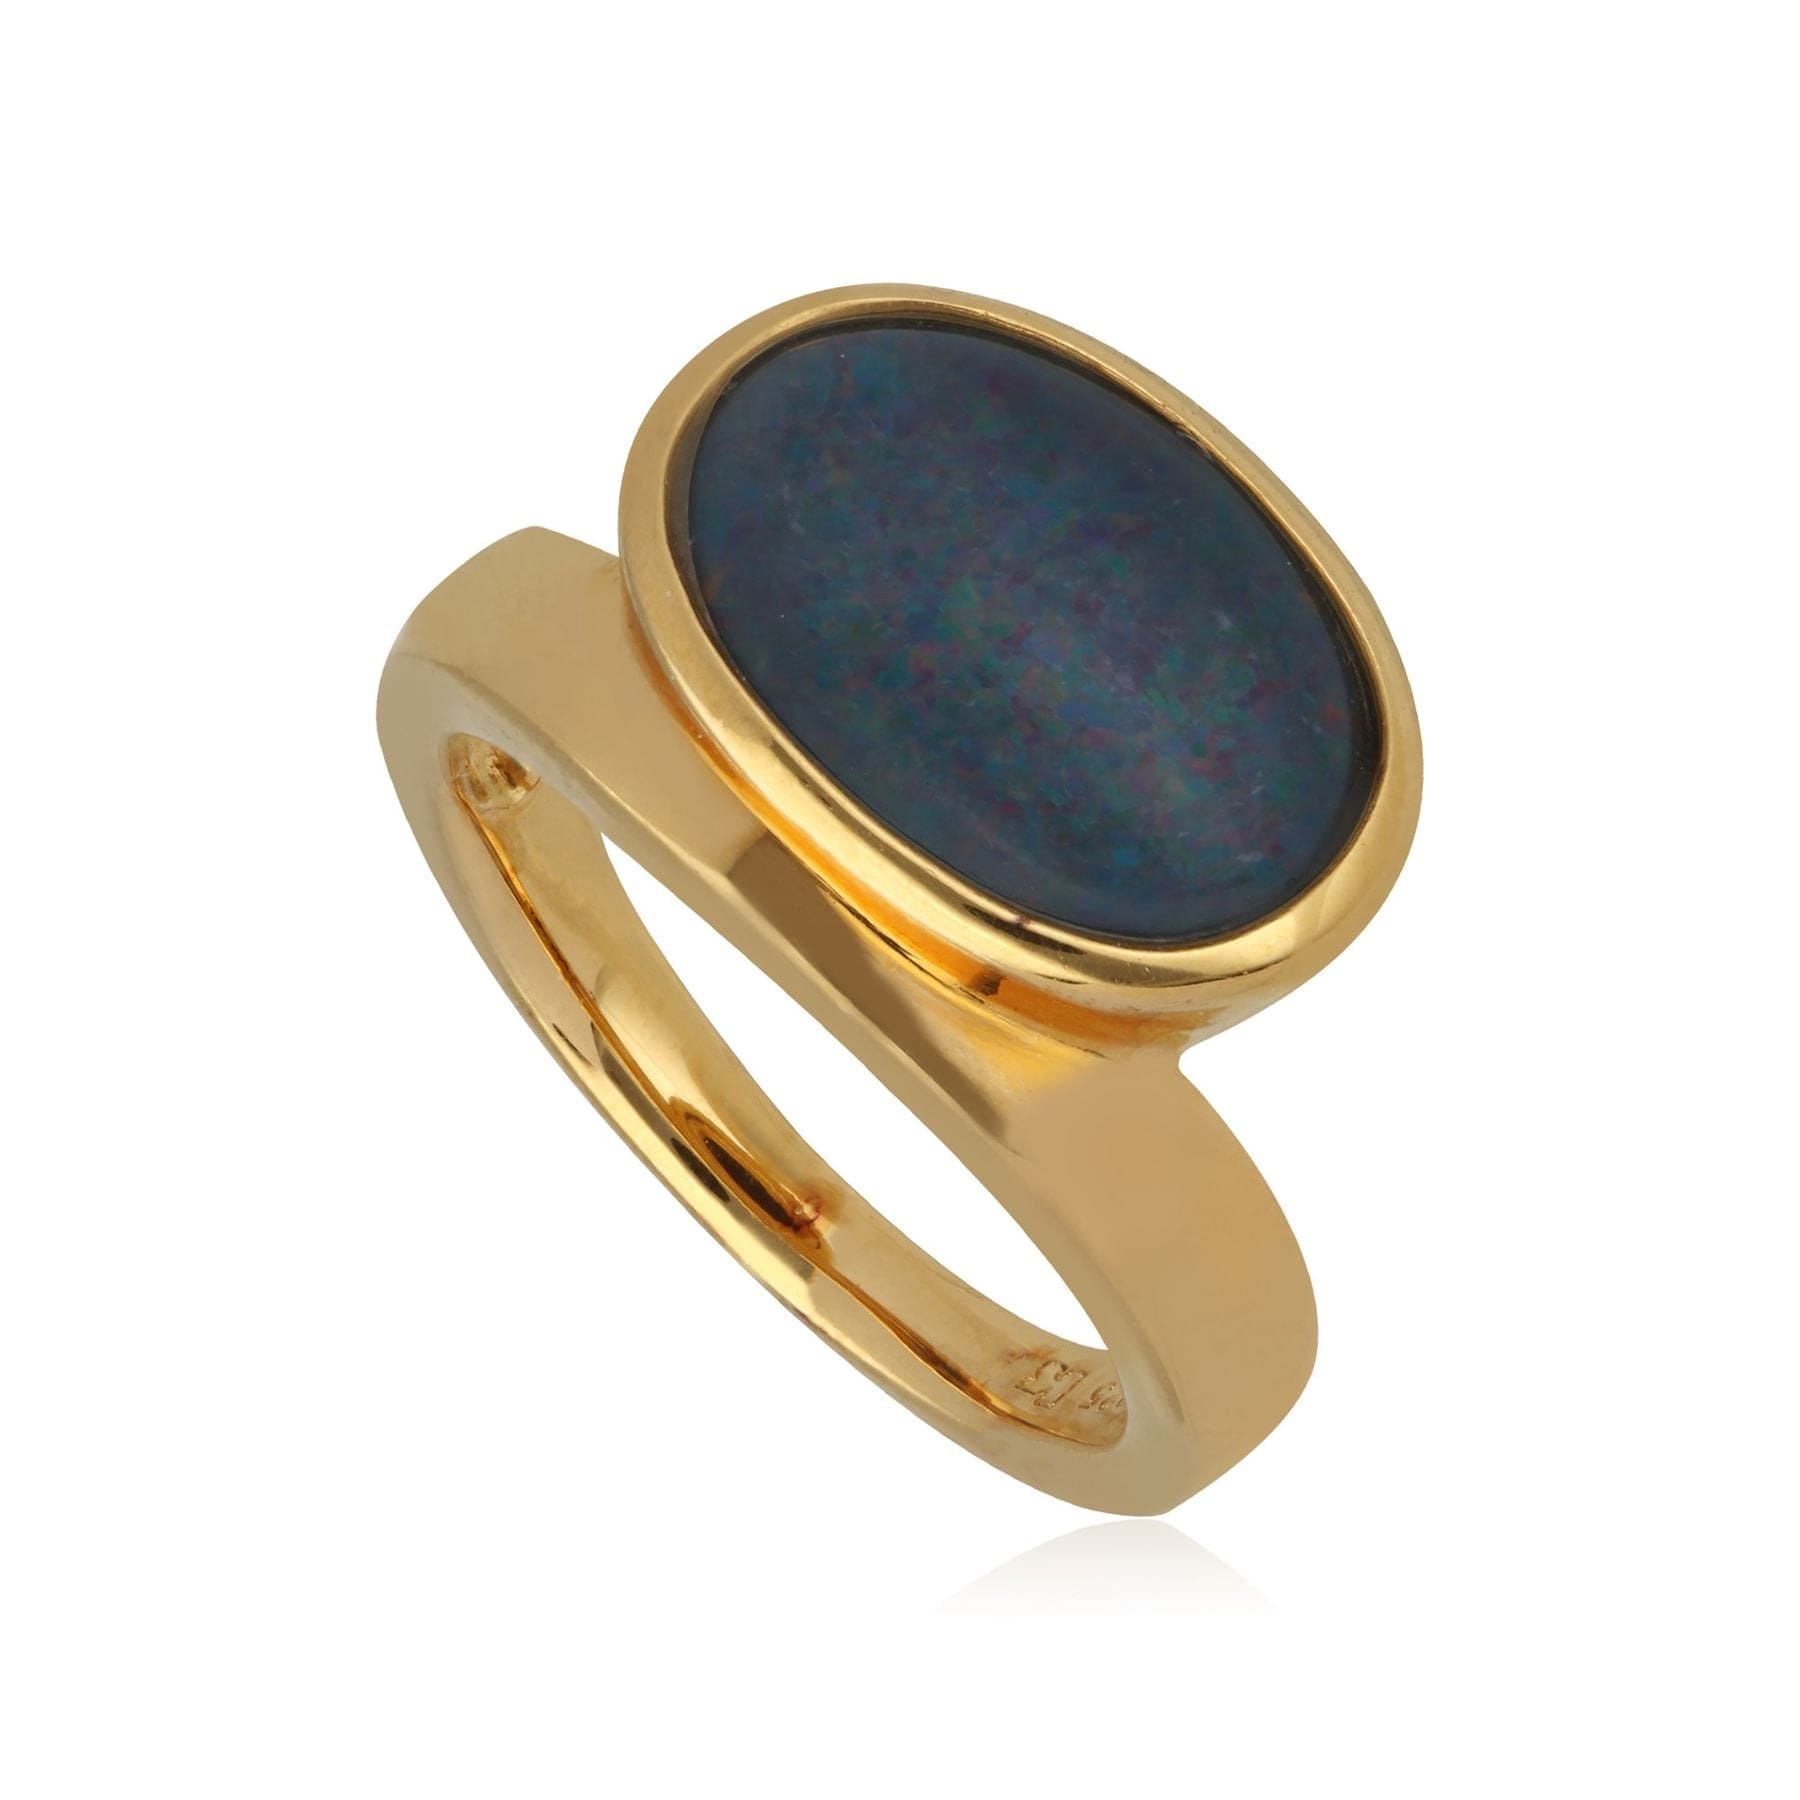 T0989R90W017 Kosmos Triplet Opal Cocktail Ring in Yellow Gold Plated Sterling Silver 2